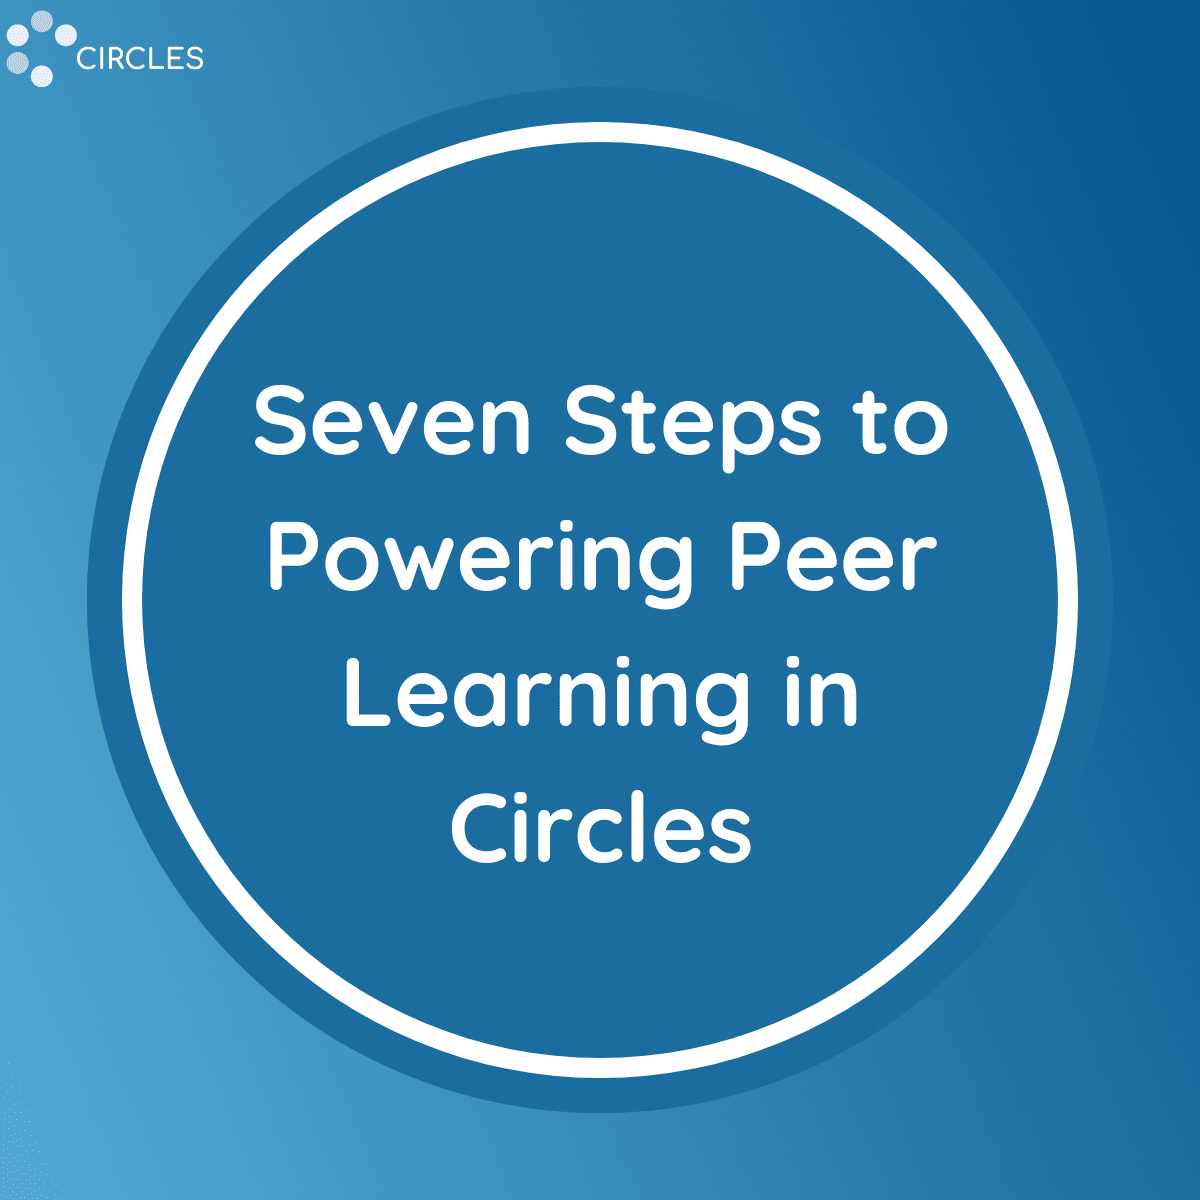 Seven Steps to Powering Peer Learning in Circles